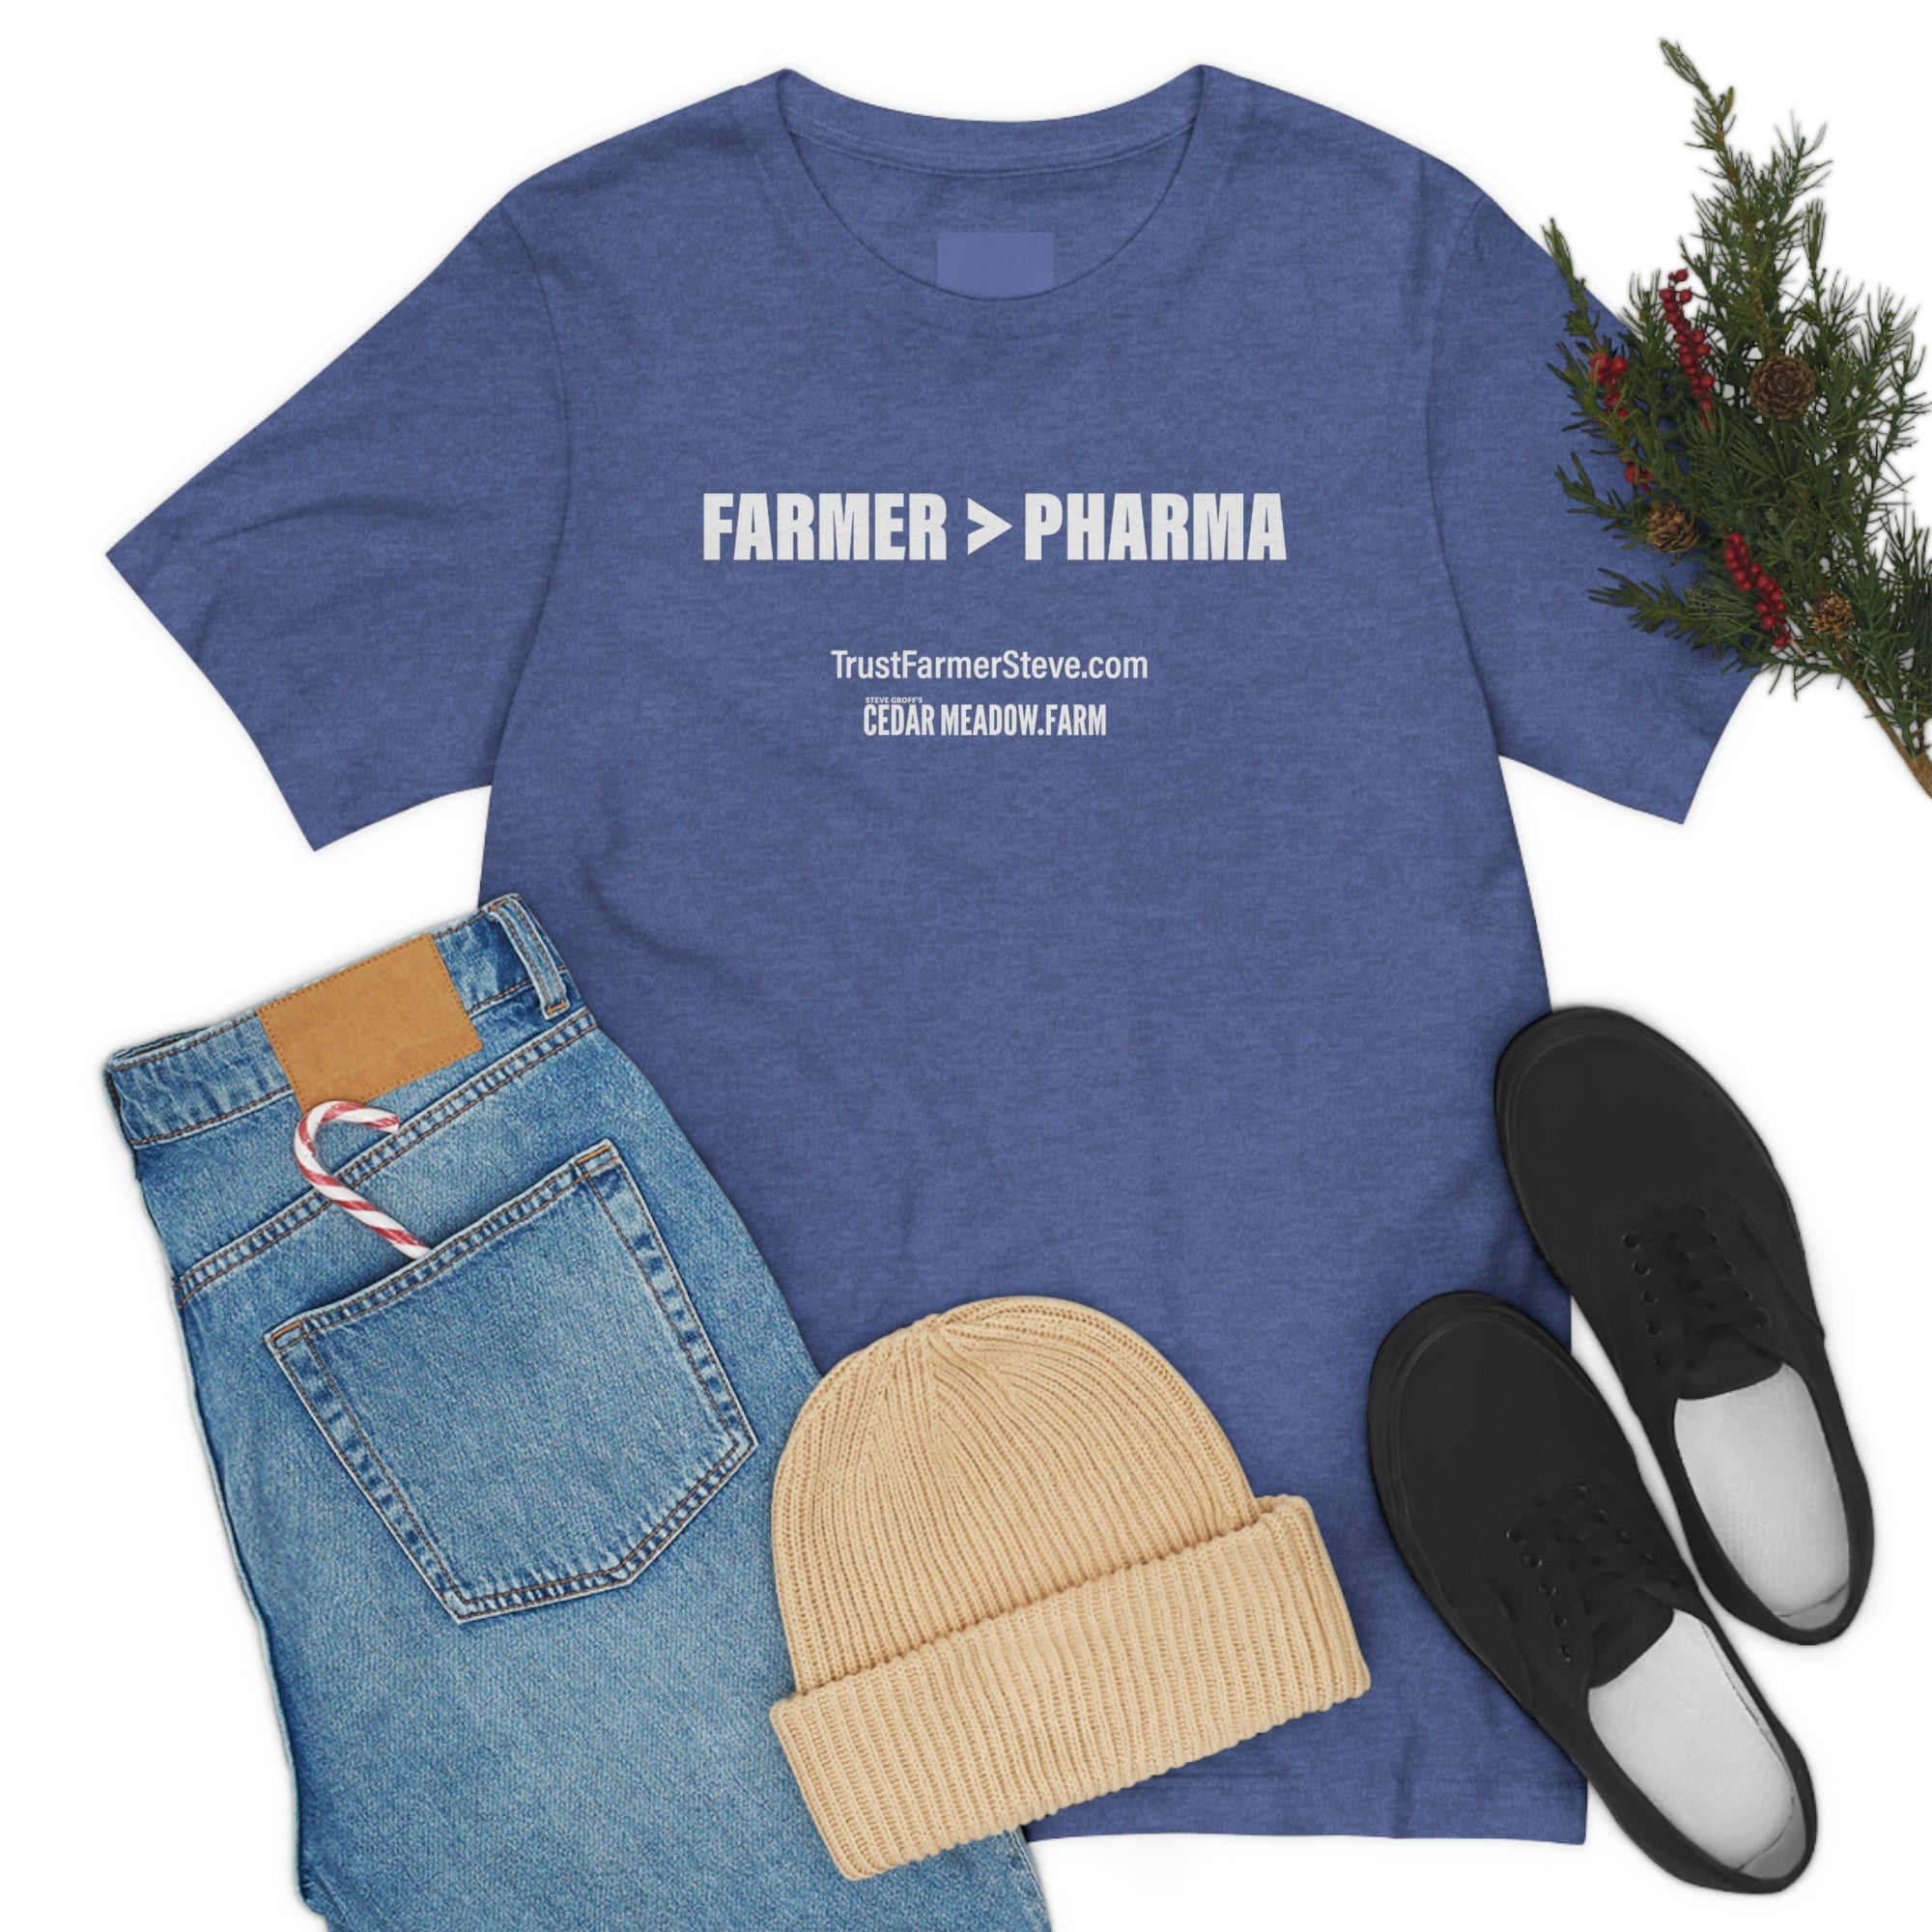 Farmer > Pharma-In no way would we ever advise you to NOT listen to your doctor and carefully considering your medial journey. 
We ARE aware, however, that "big pharma" sometimes mi-Cedar Meadow Farm